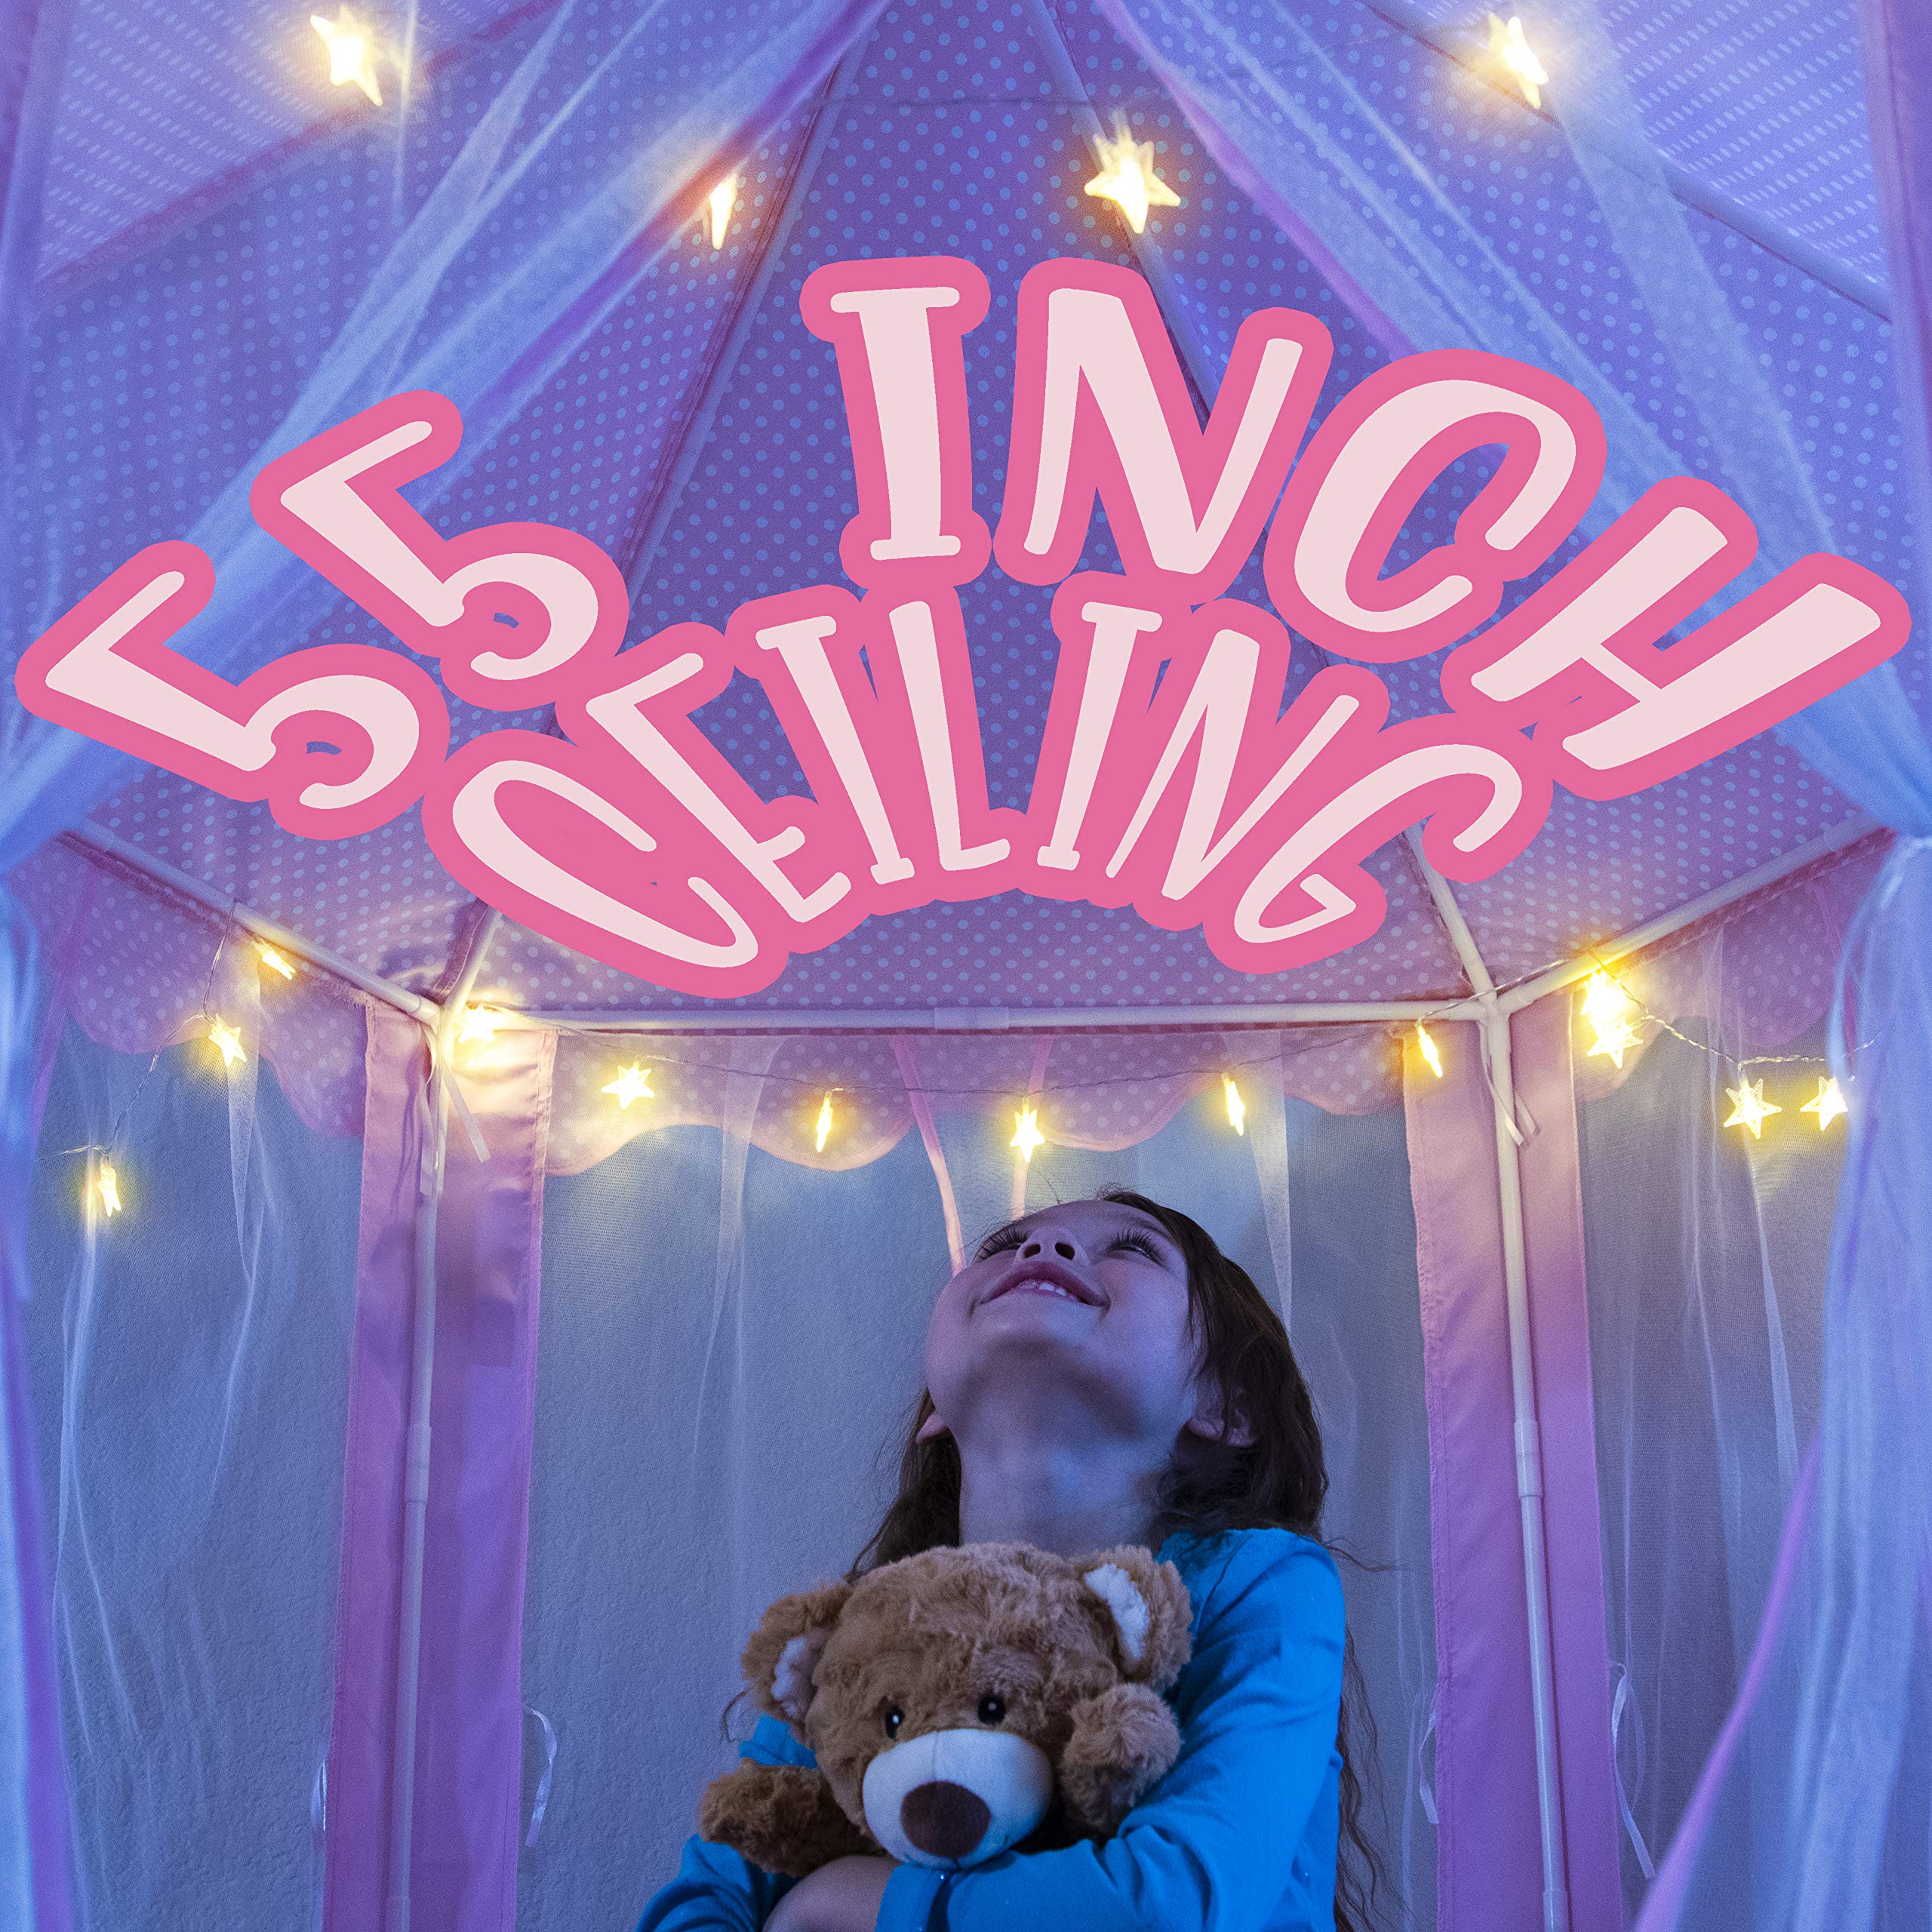 FoxPrint Castle Princess Tents for Little Girls with Lights, Soft Fairy Star Lighting for Indoor and Outdoor Play, Quick 55” x 5